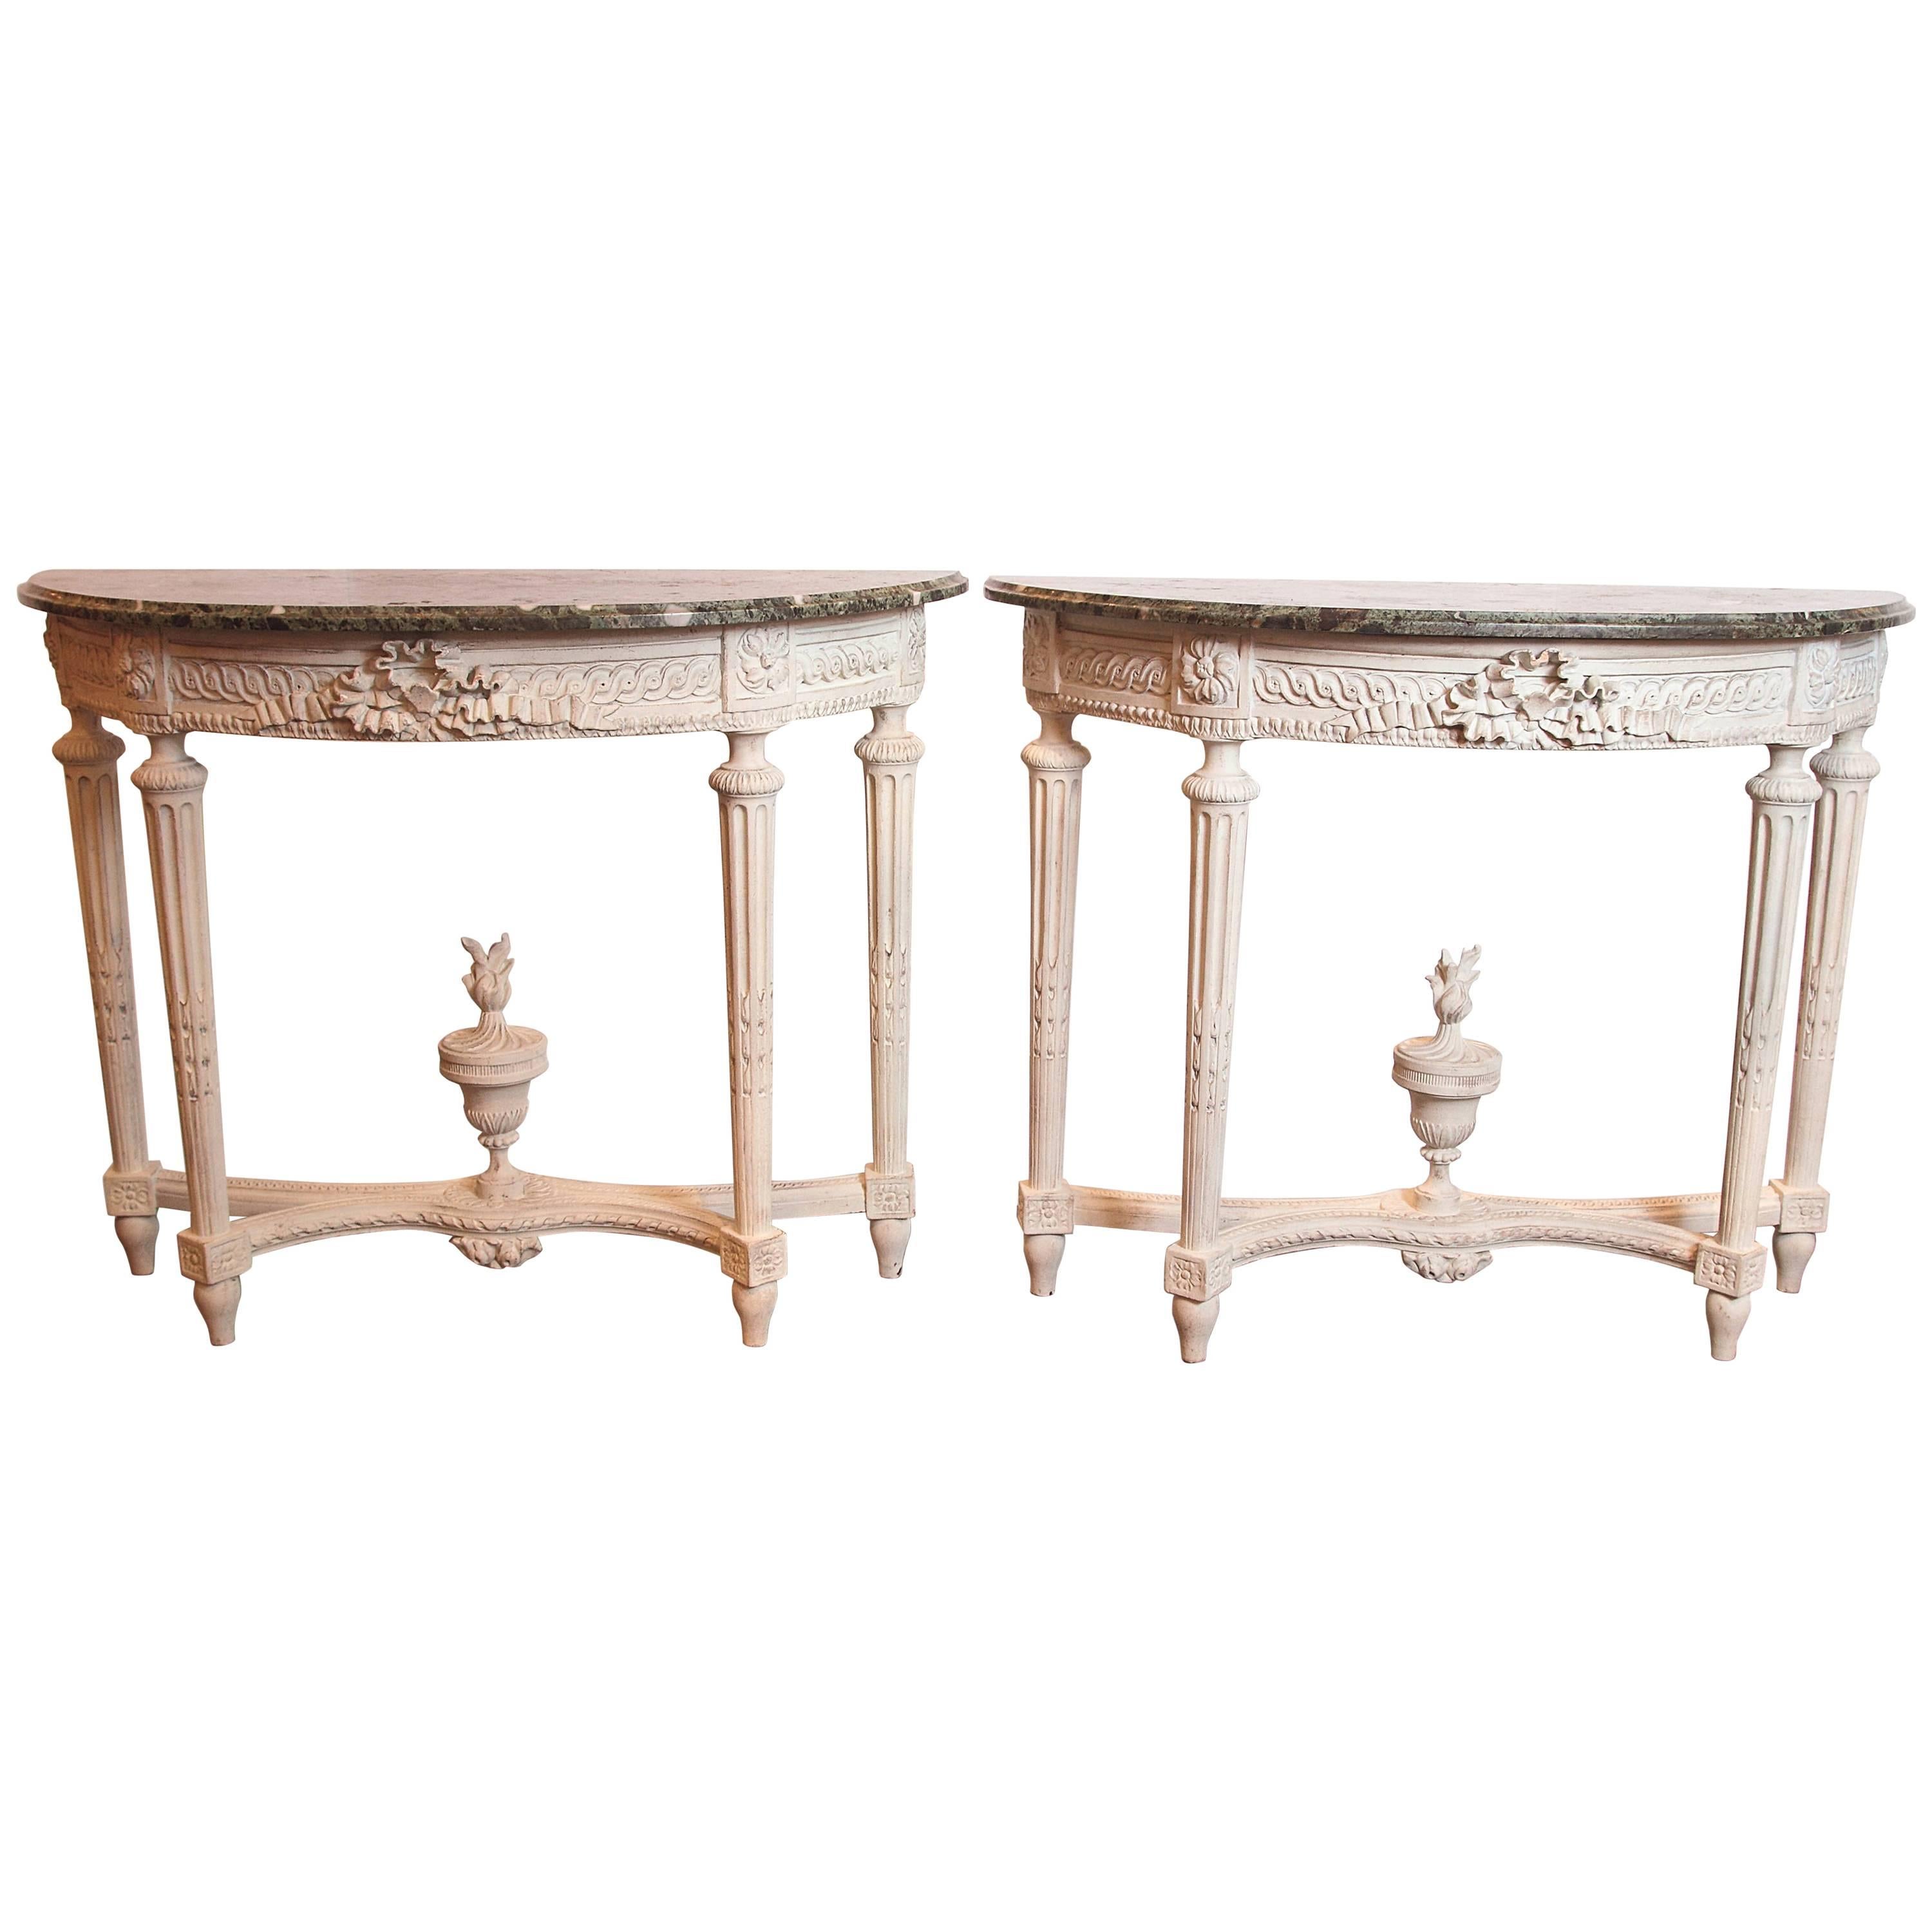 Pair of 19th Century French Louis XVI Painted CrèmeConsoles